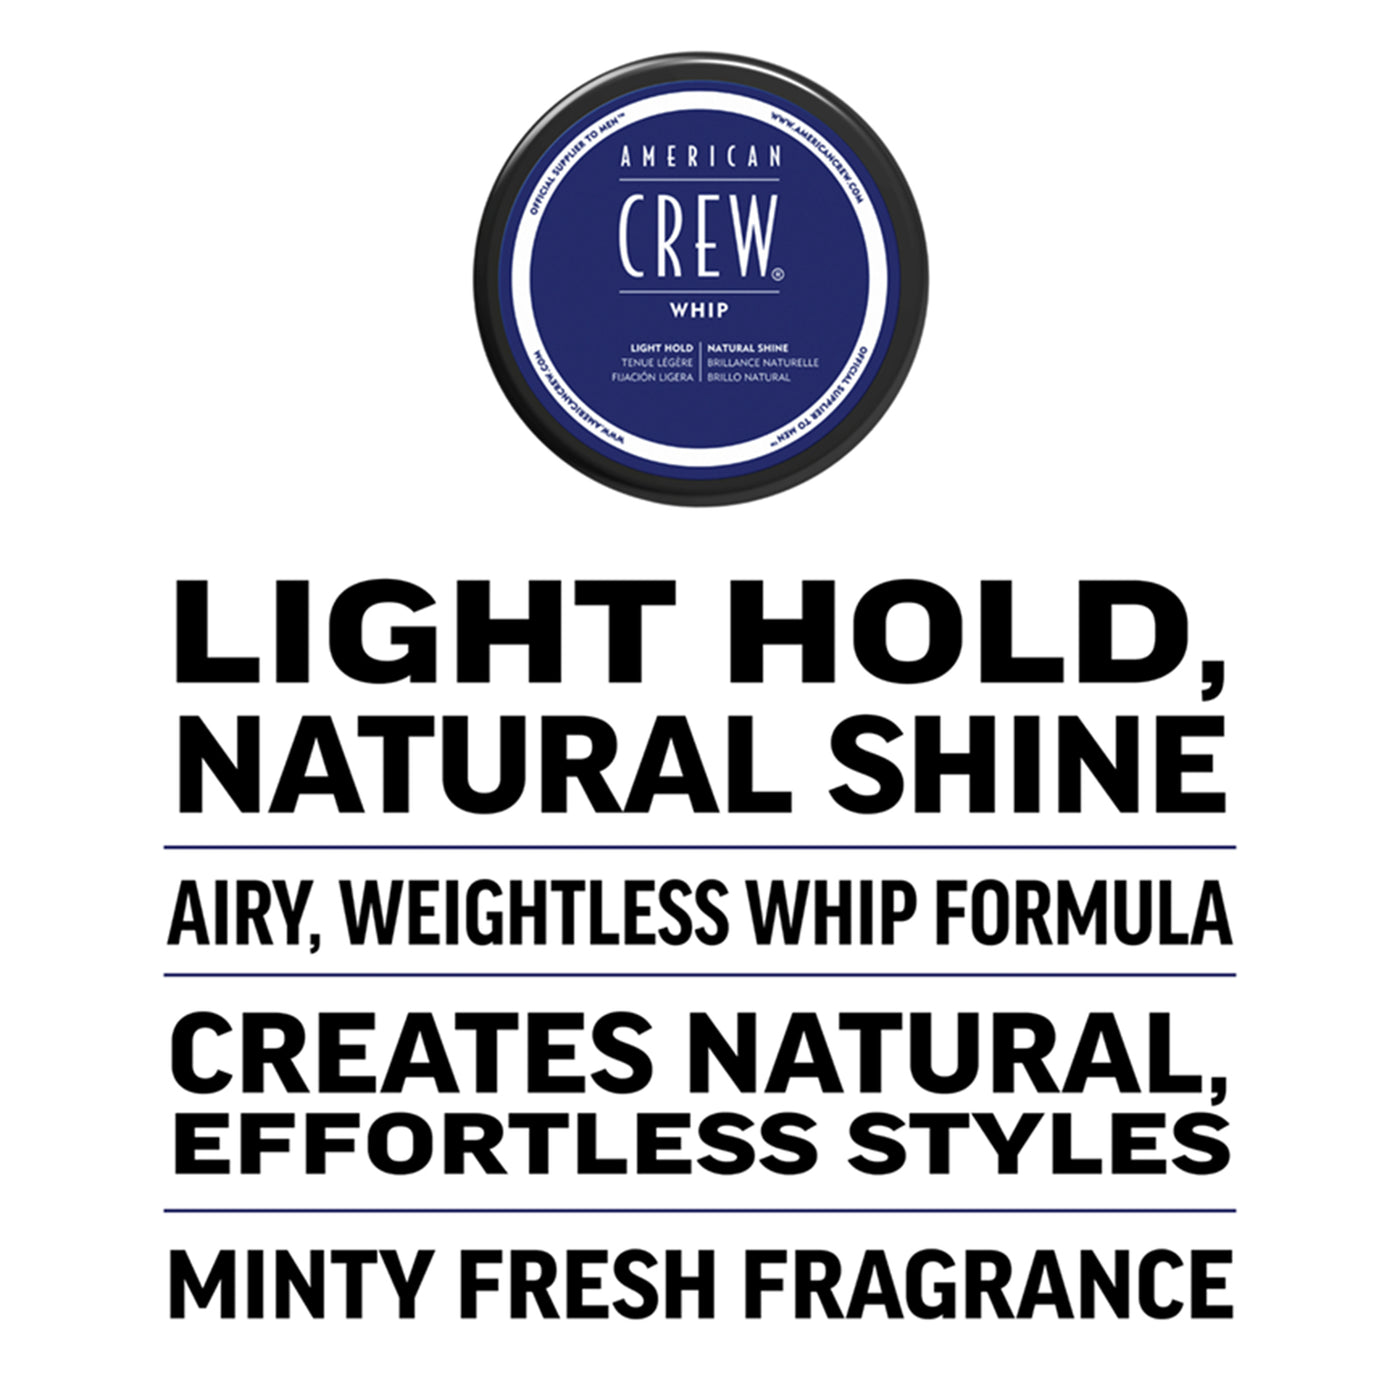 American Crew Whip Pomade (85g) features